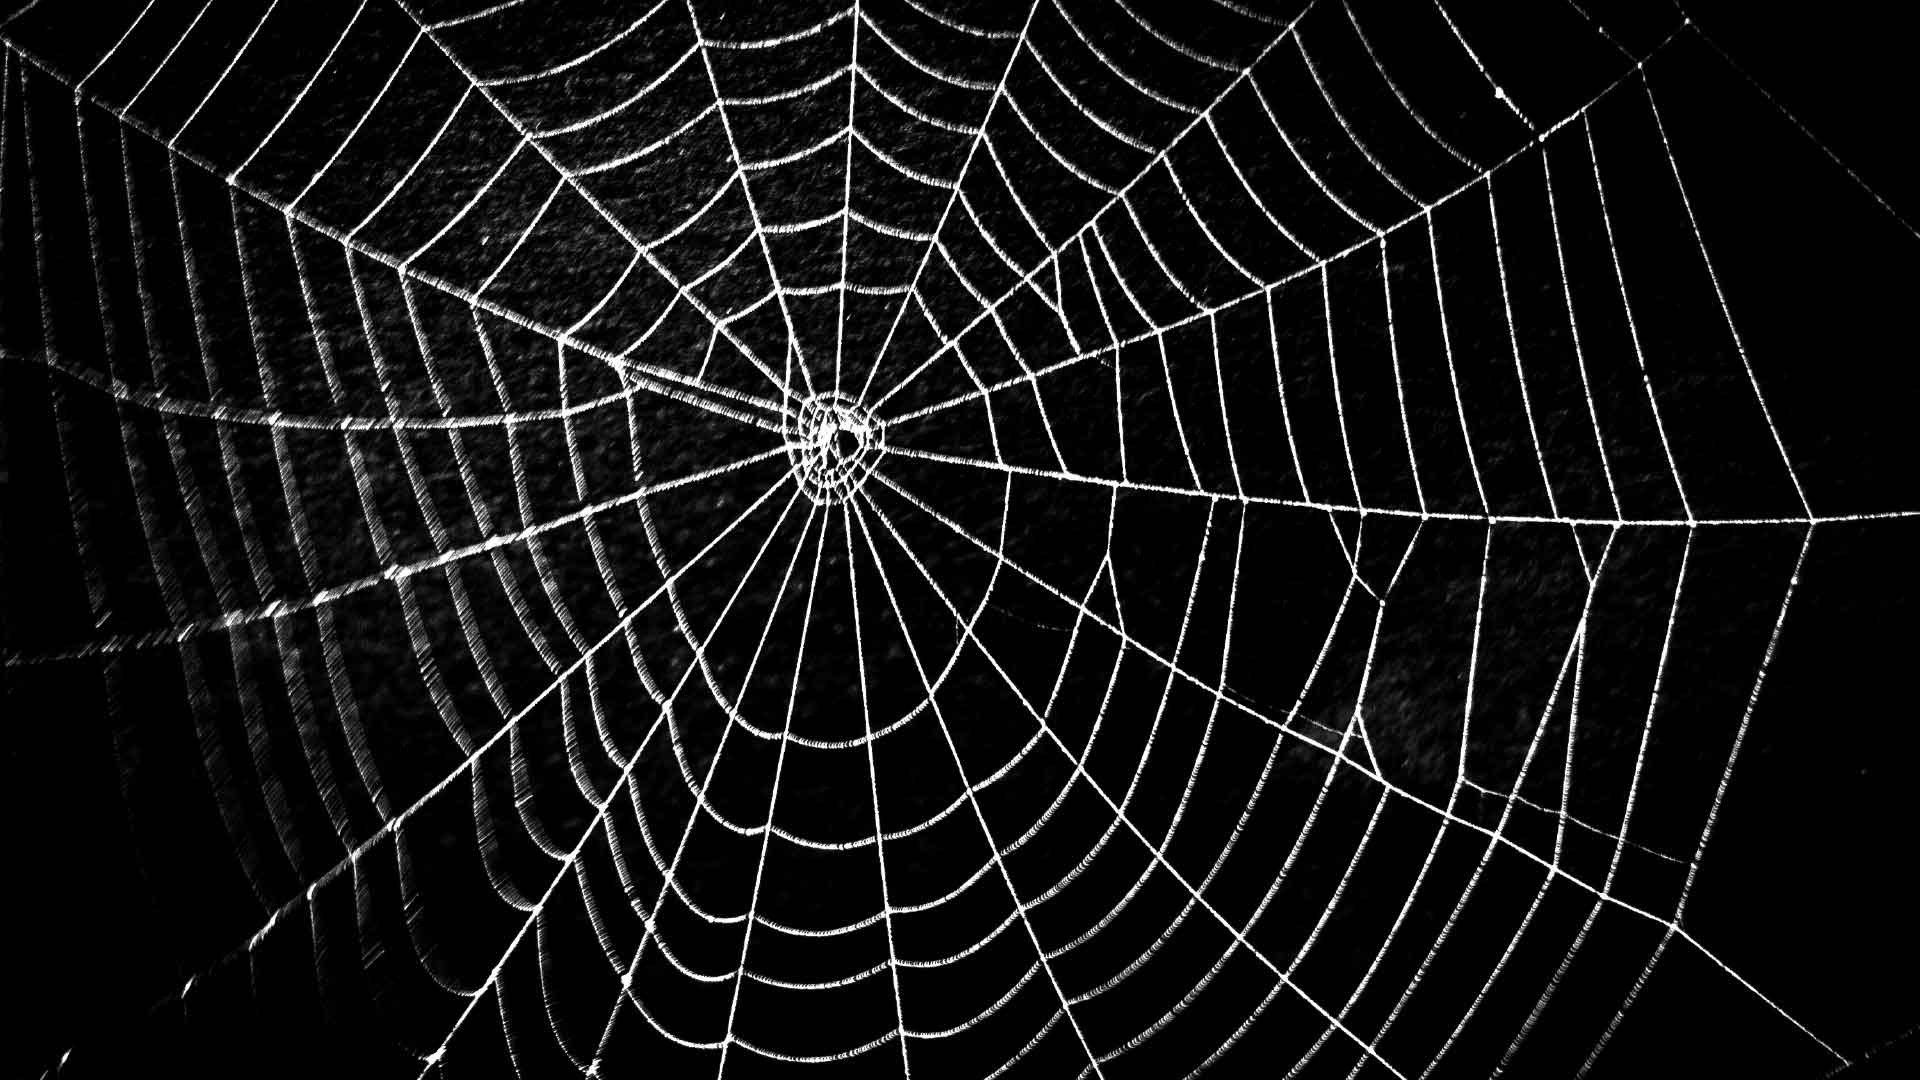 Spiderweb with a black background